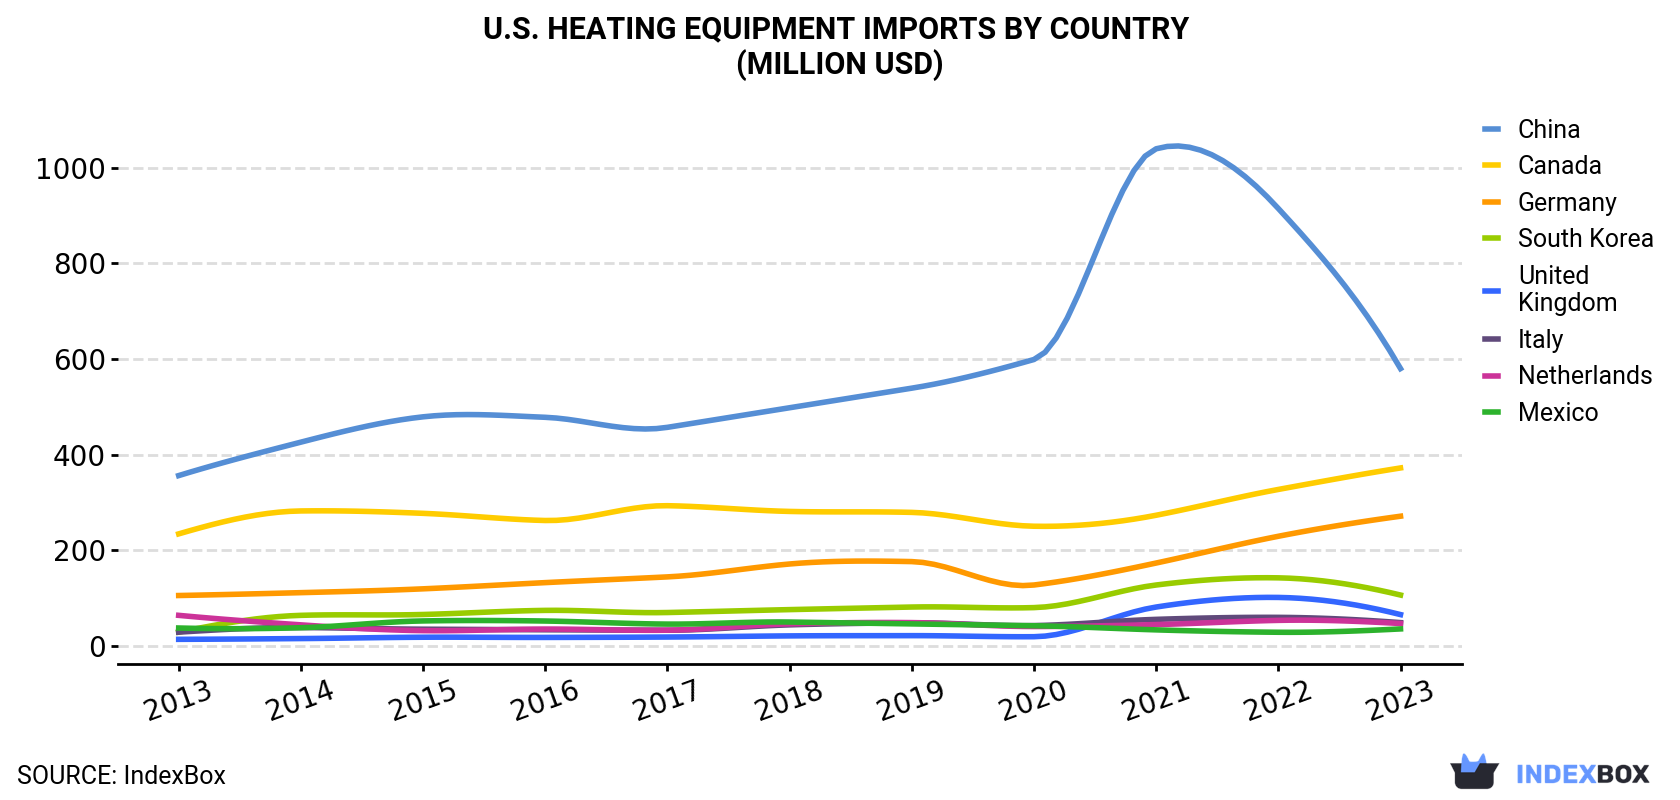 U.S. Heating Equipment Imports By Country (Million USD)